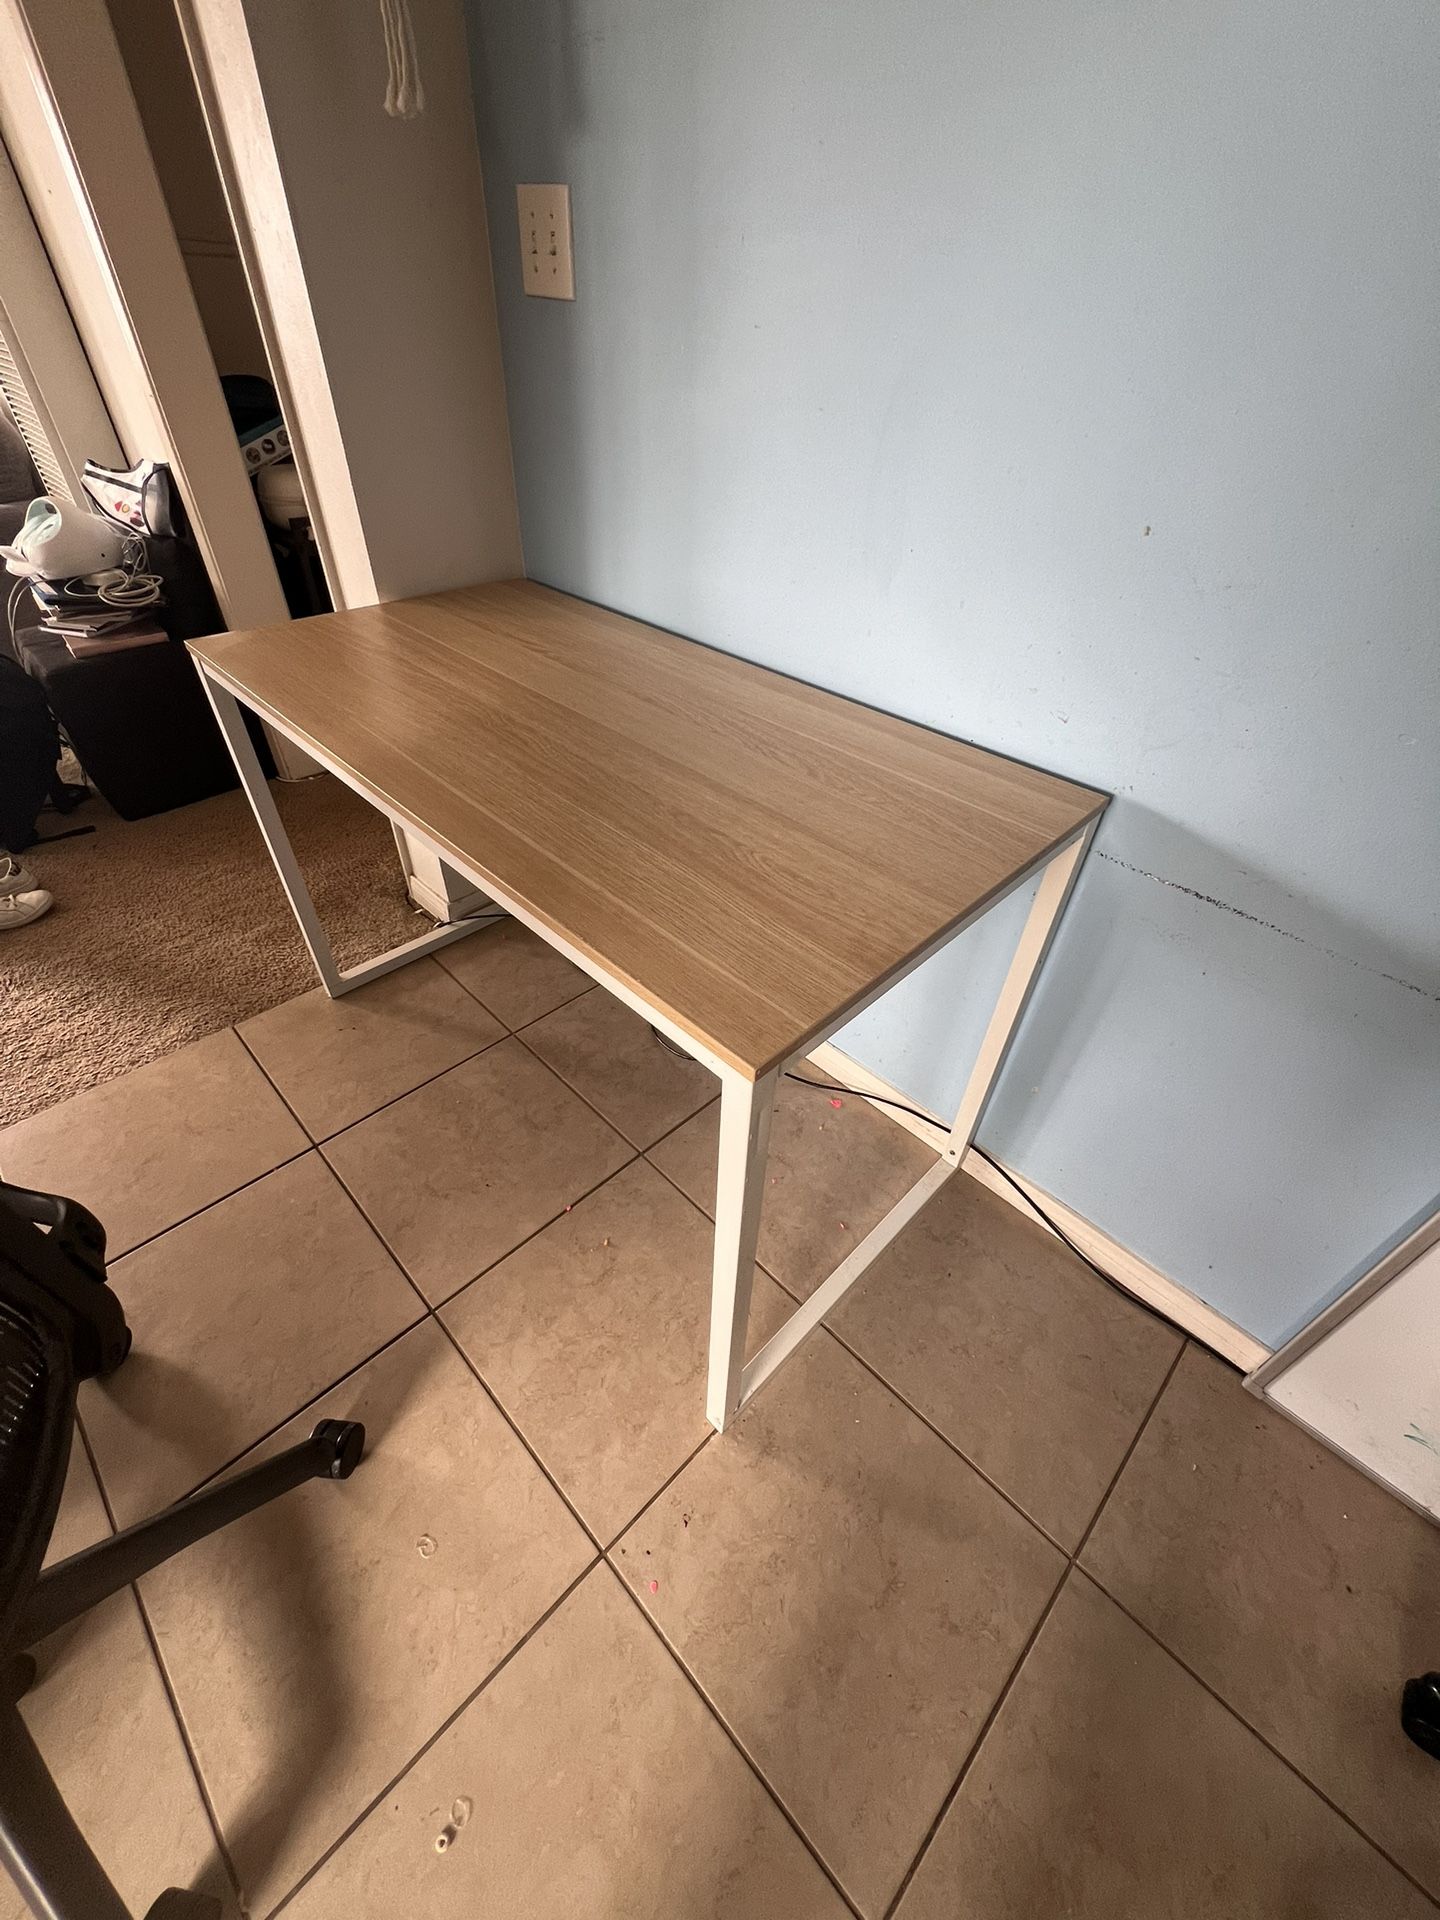 Desk / Table $40 - Must Be Able To Pickup (PB) 